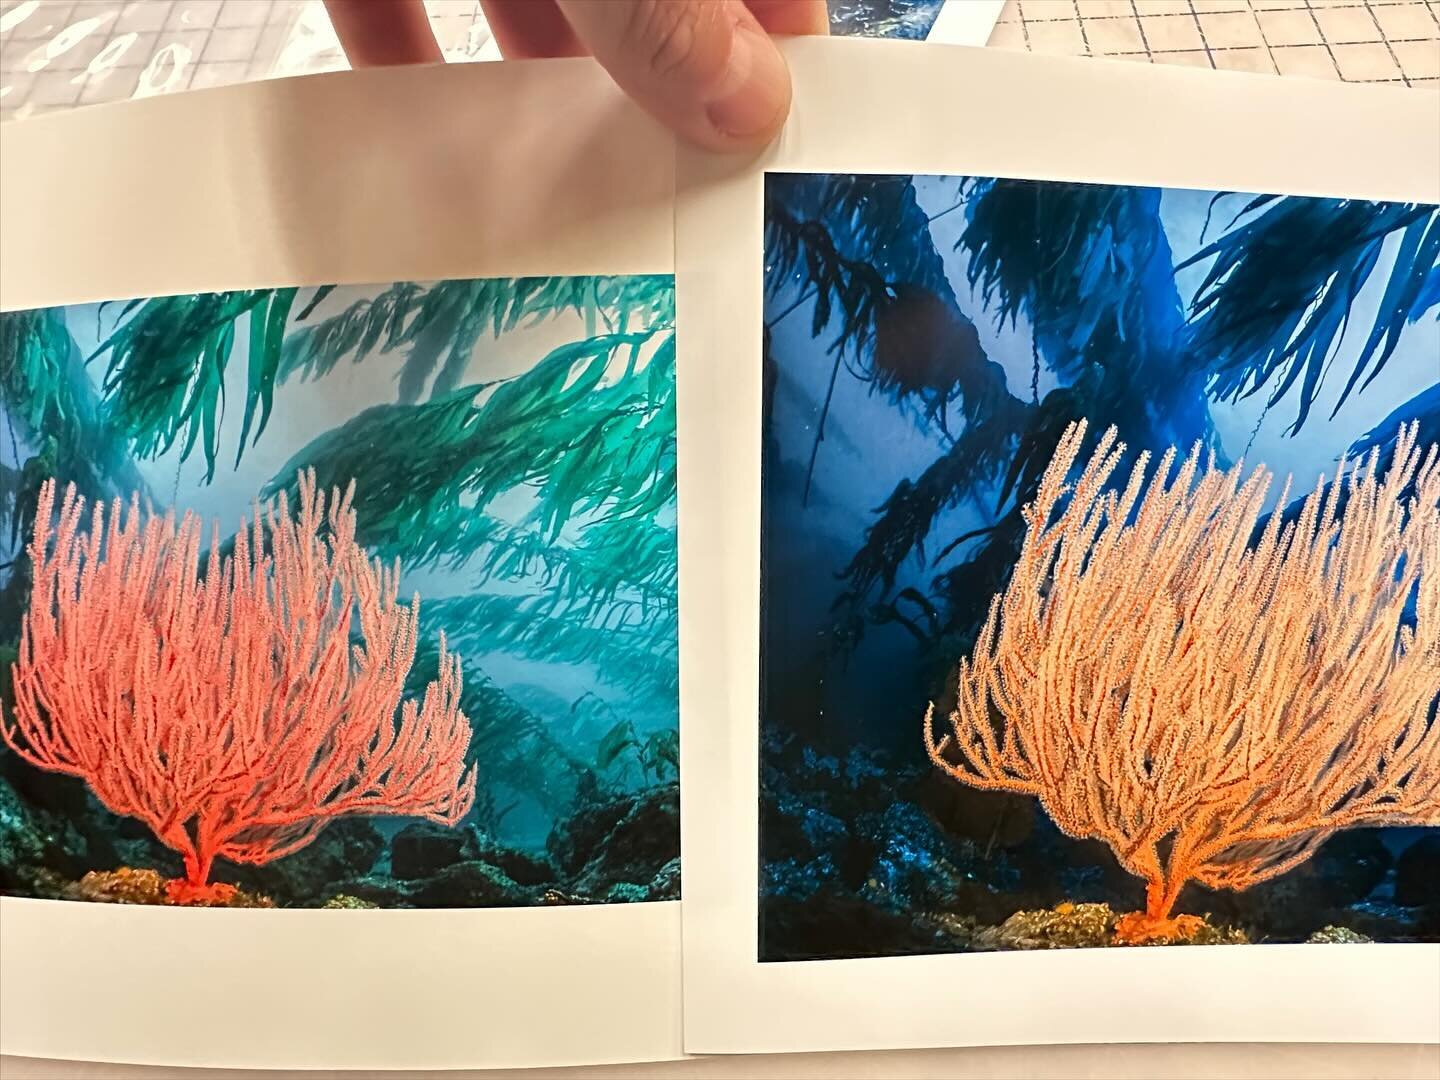 This is why it&rsquo;s important to calibrate your monitor. The print was supposed to look like the image in the left, but initially was printing like the photo on the right. Make routine calibrations as a New Year&rsquo;s resolution! #printing #cali